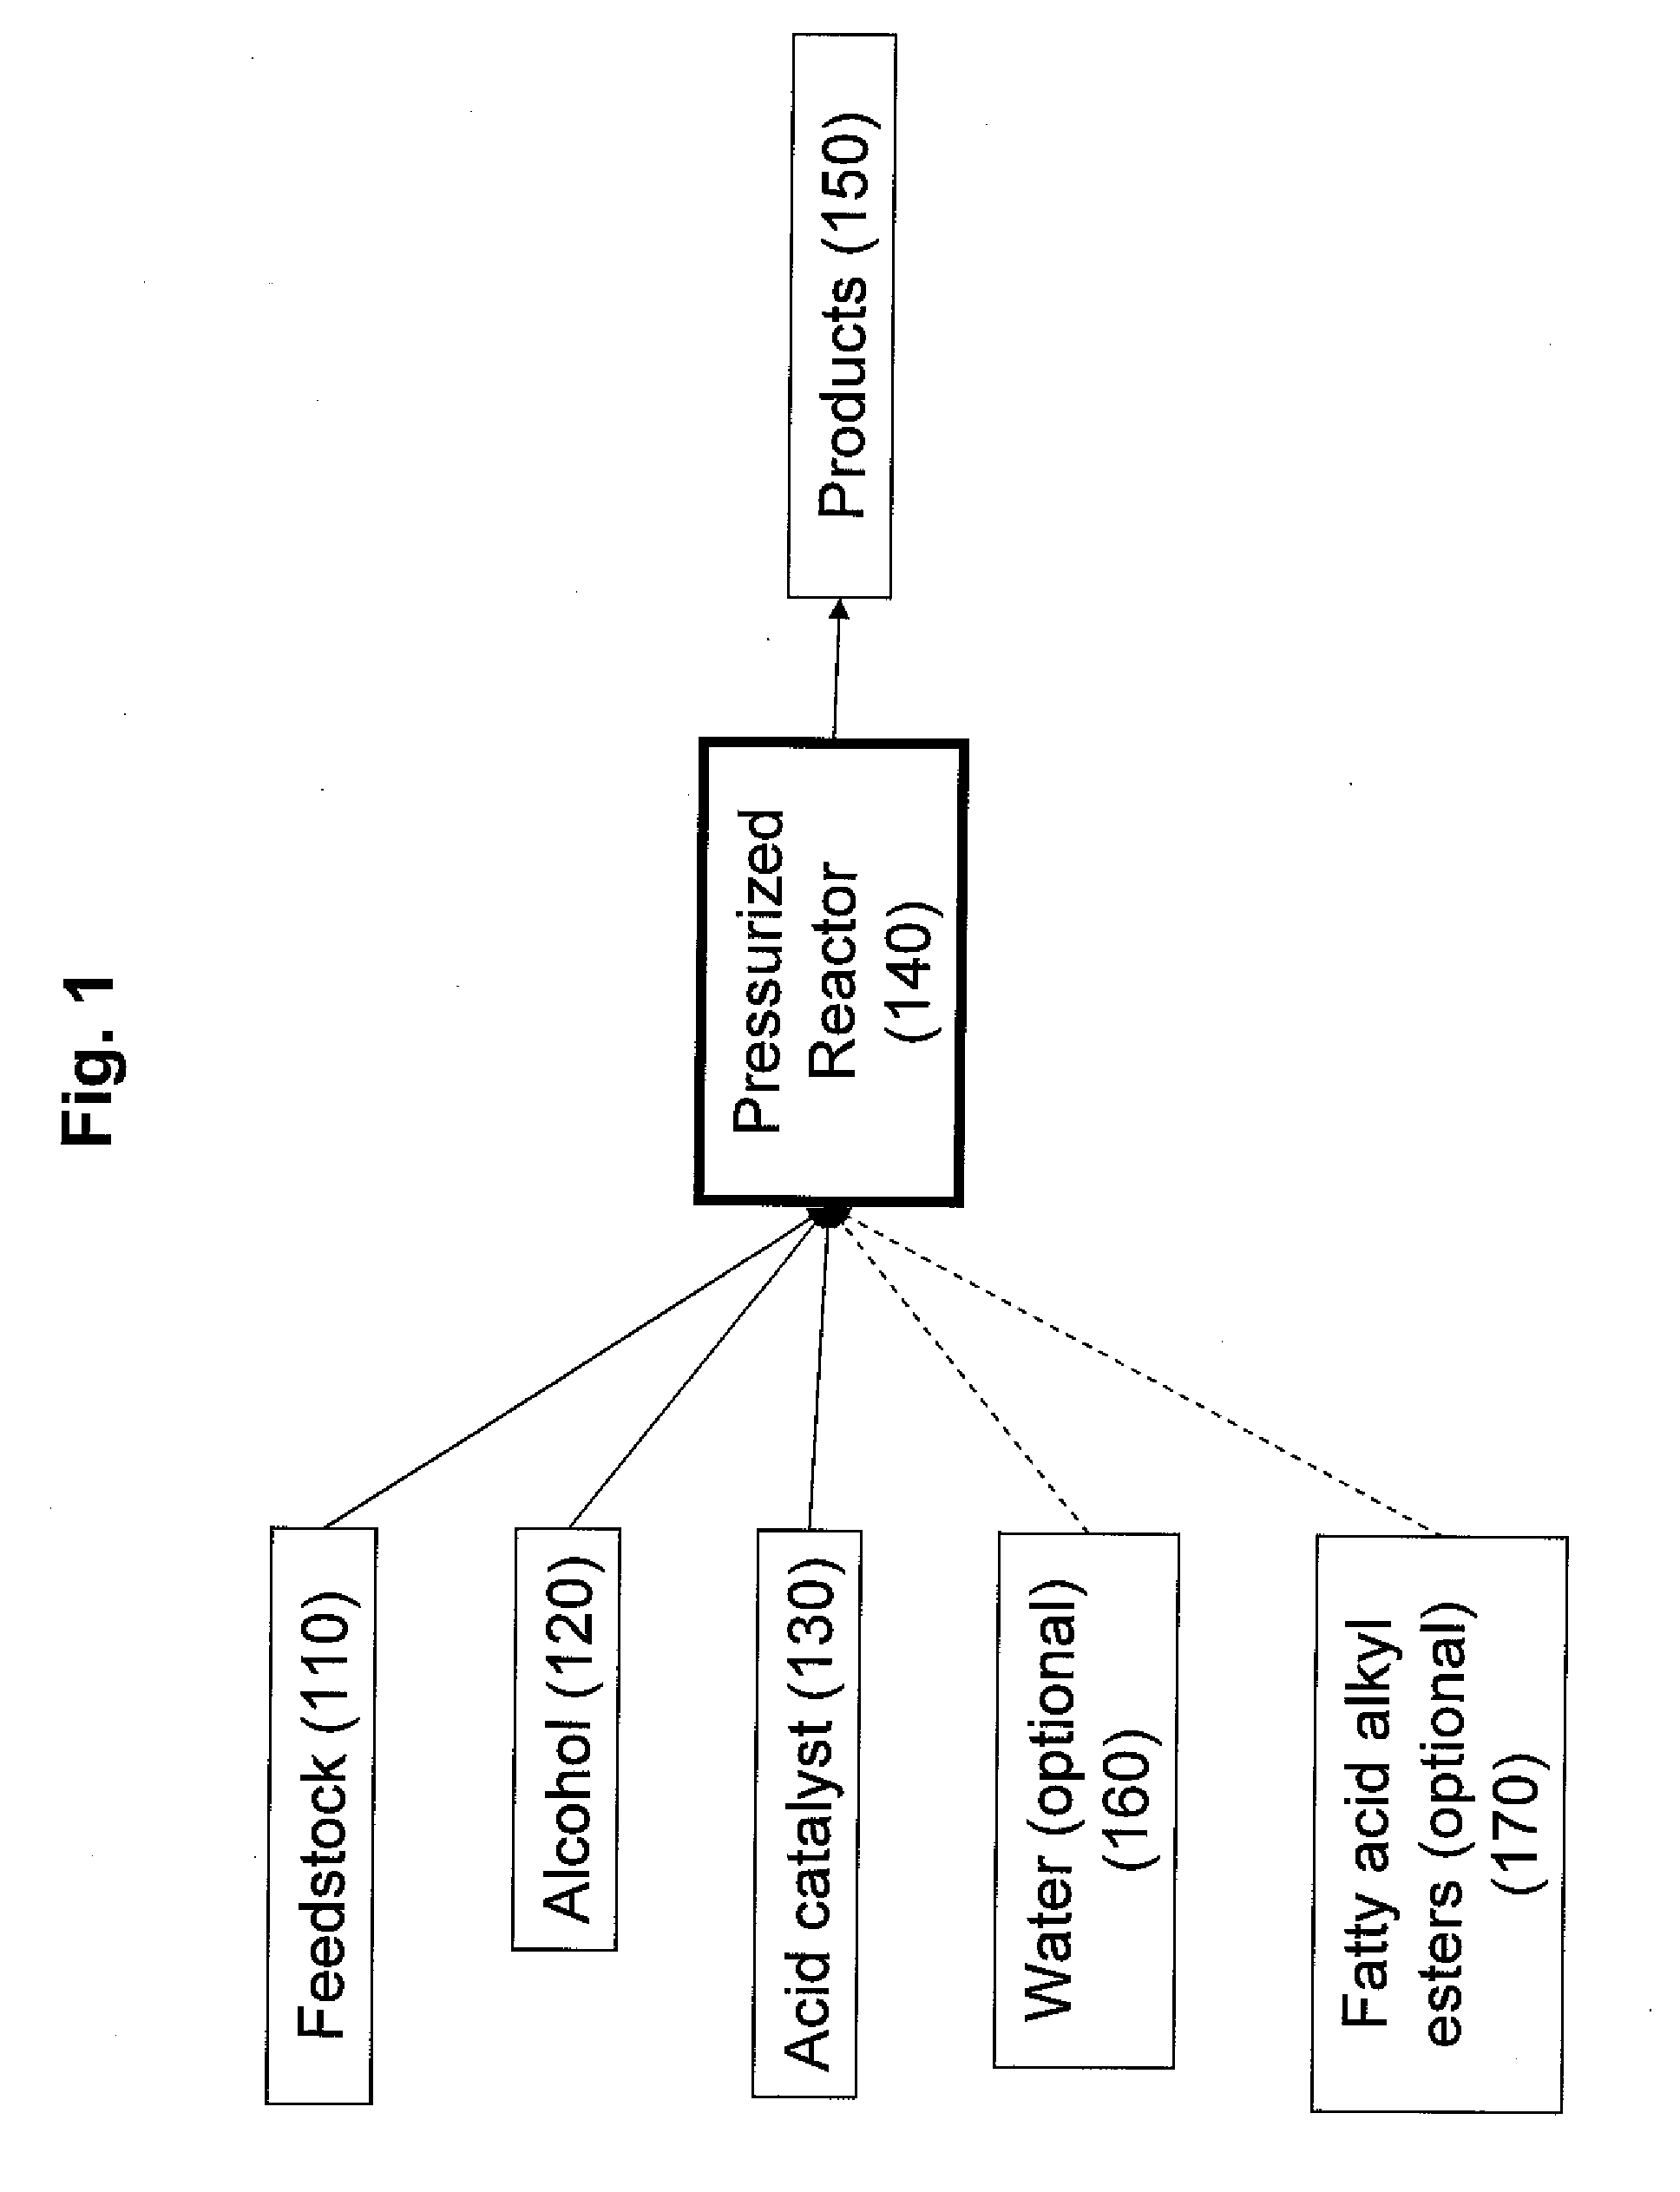 Production of biodiesel, cellulosic sugars, and peptides from the simultaneous esterification and alcoholysis/hydrolysis of oil-containing materials with cellulosic and peptidic content